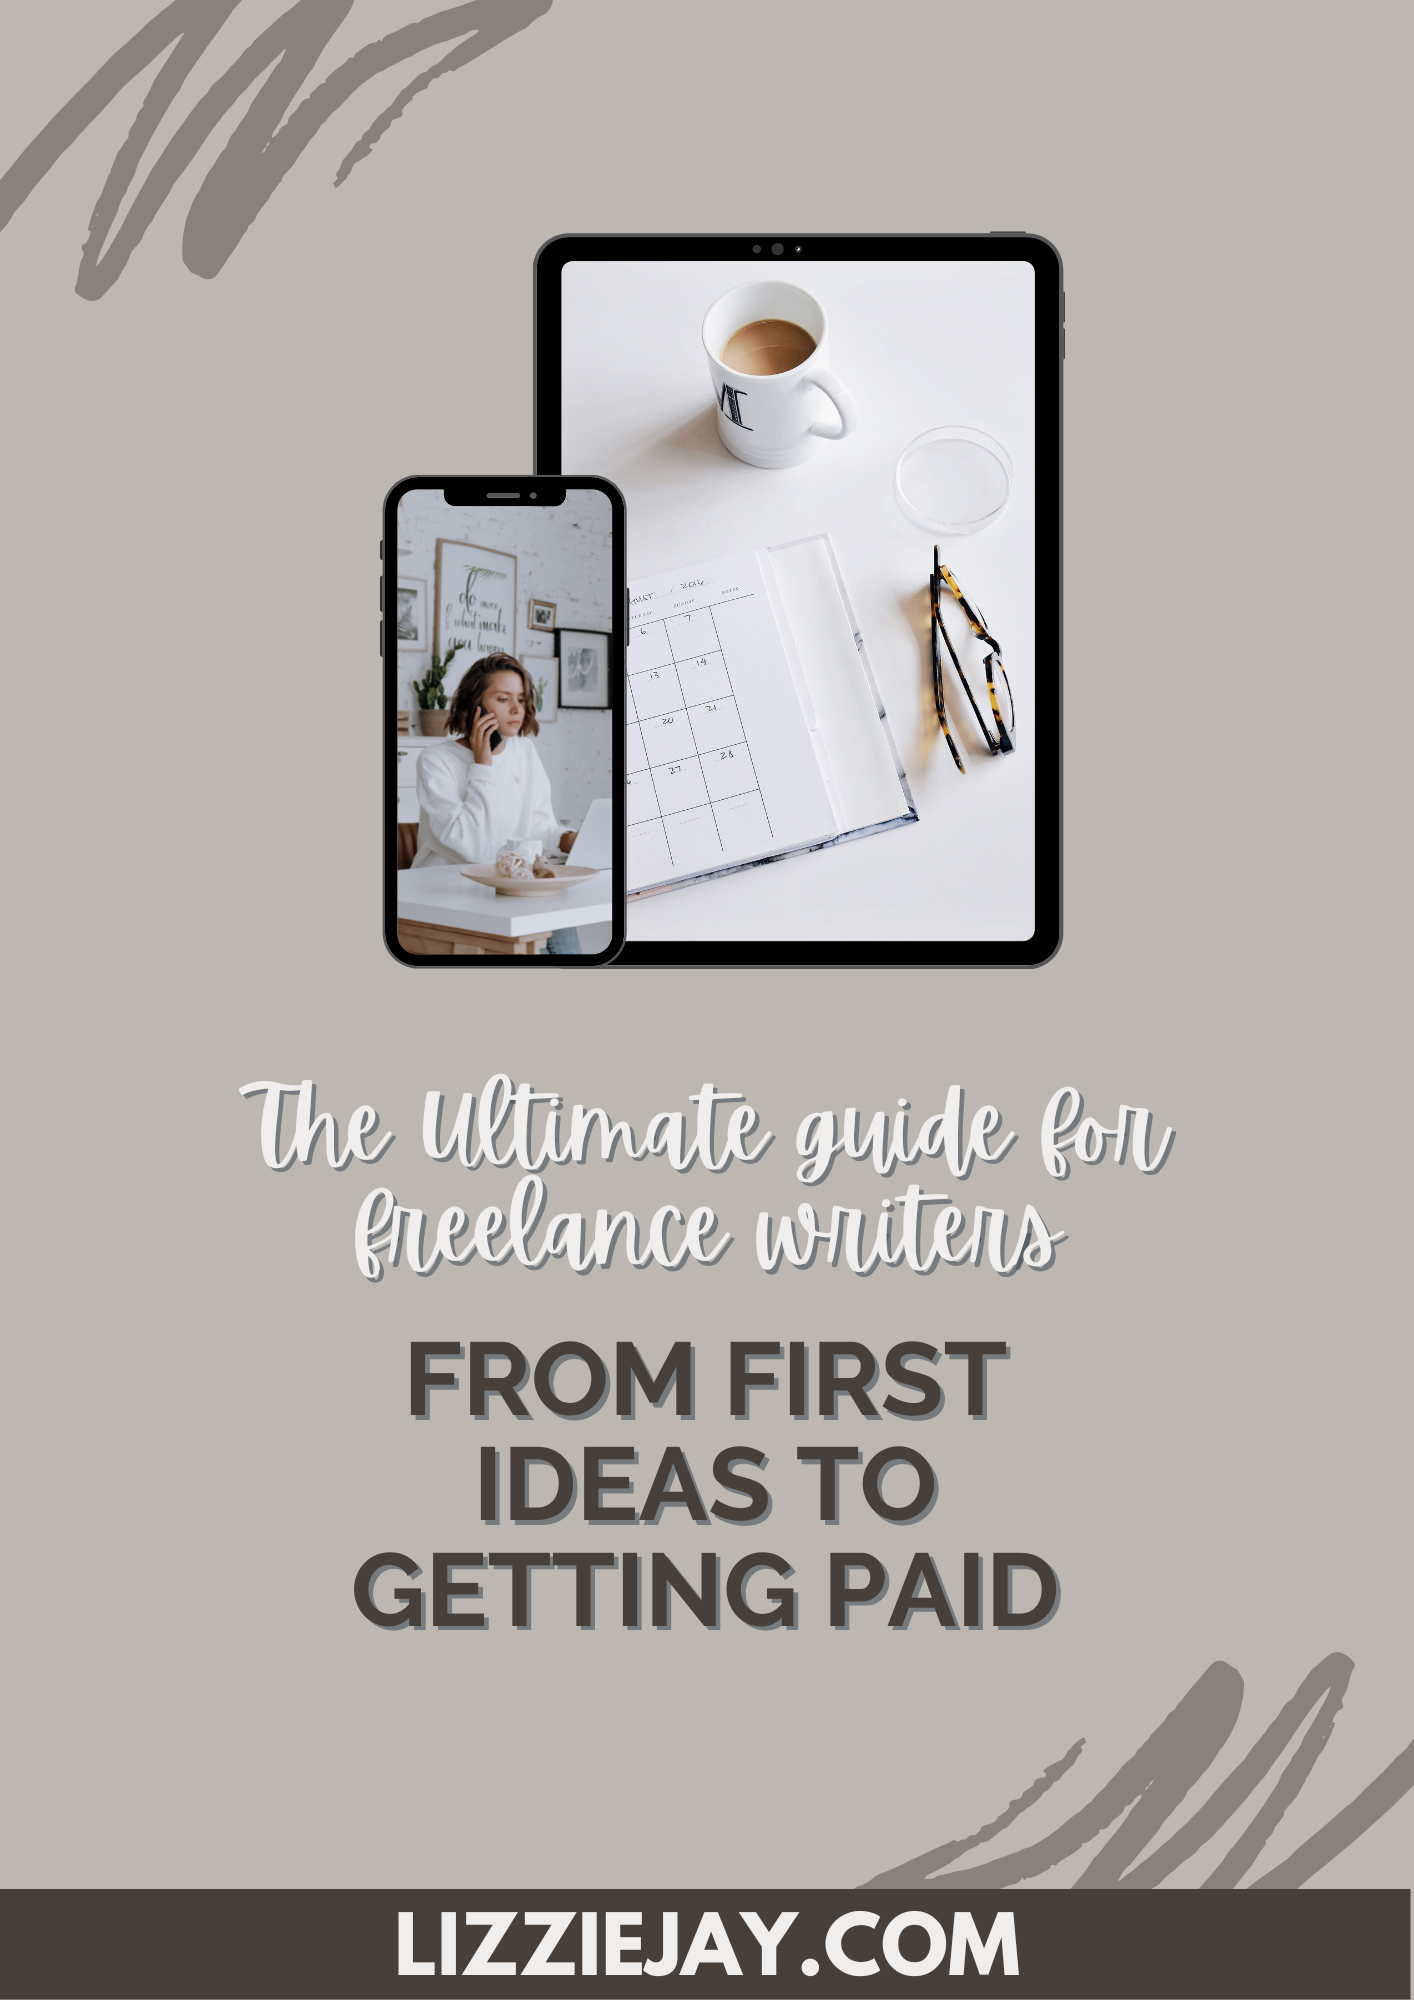 The Ultimate Guide for Freelance Writers